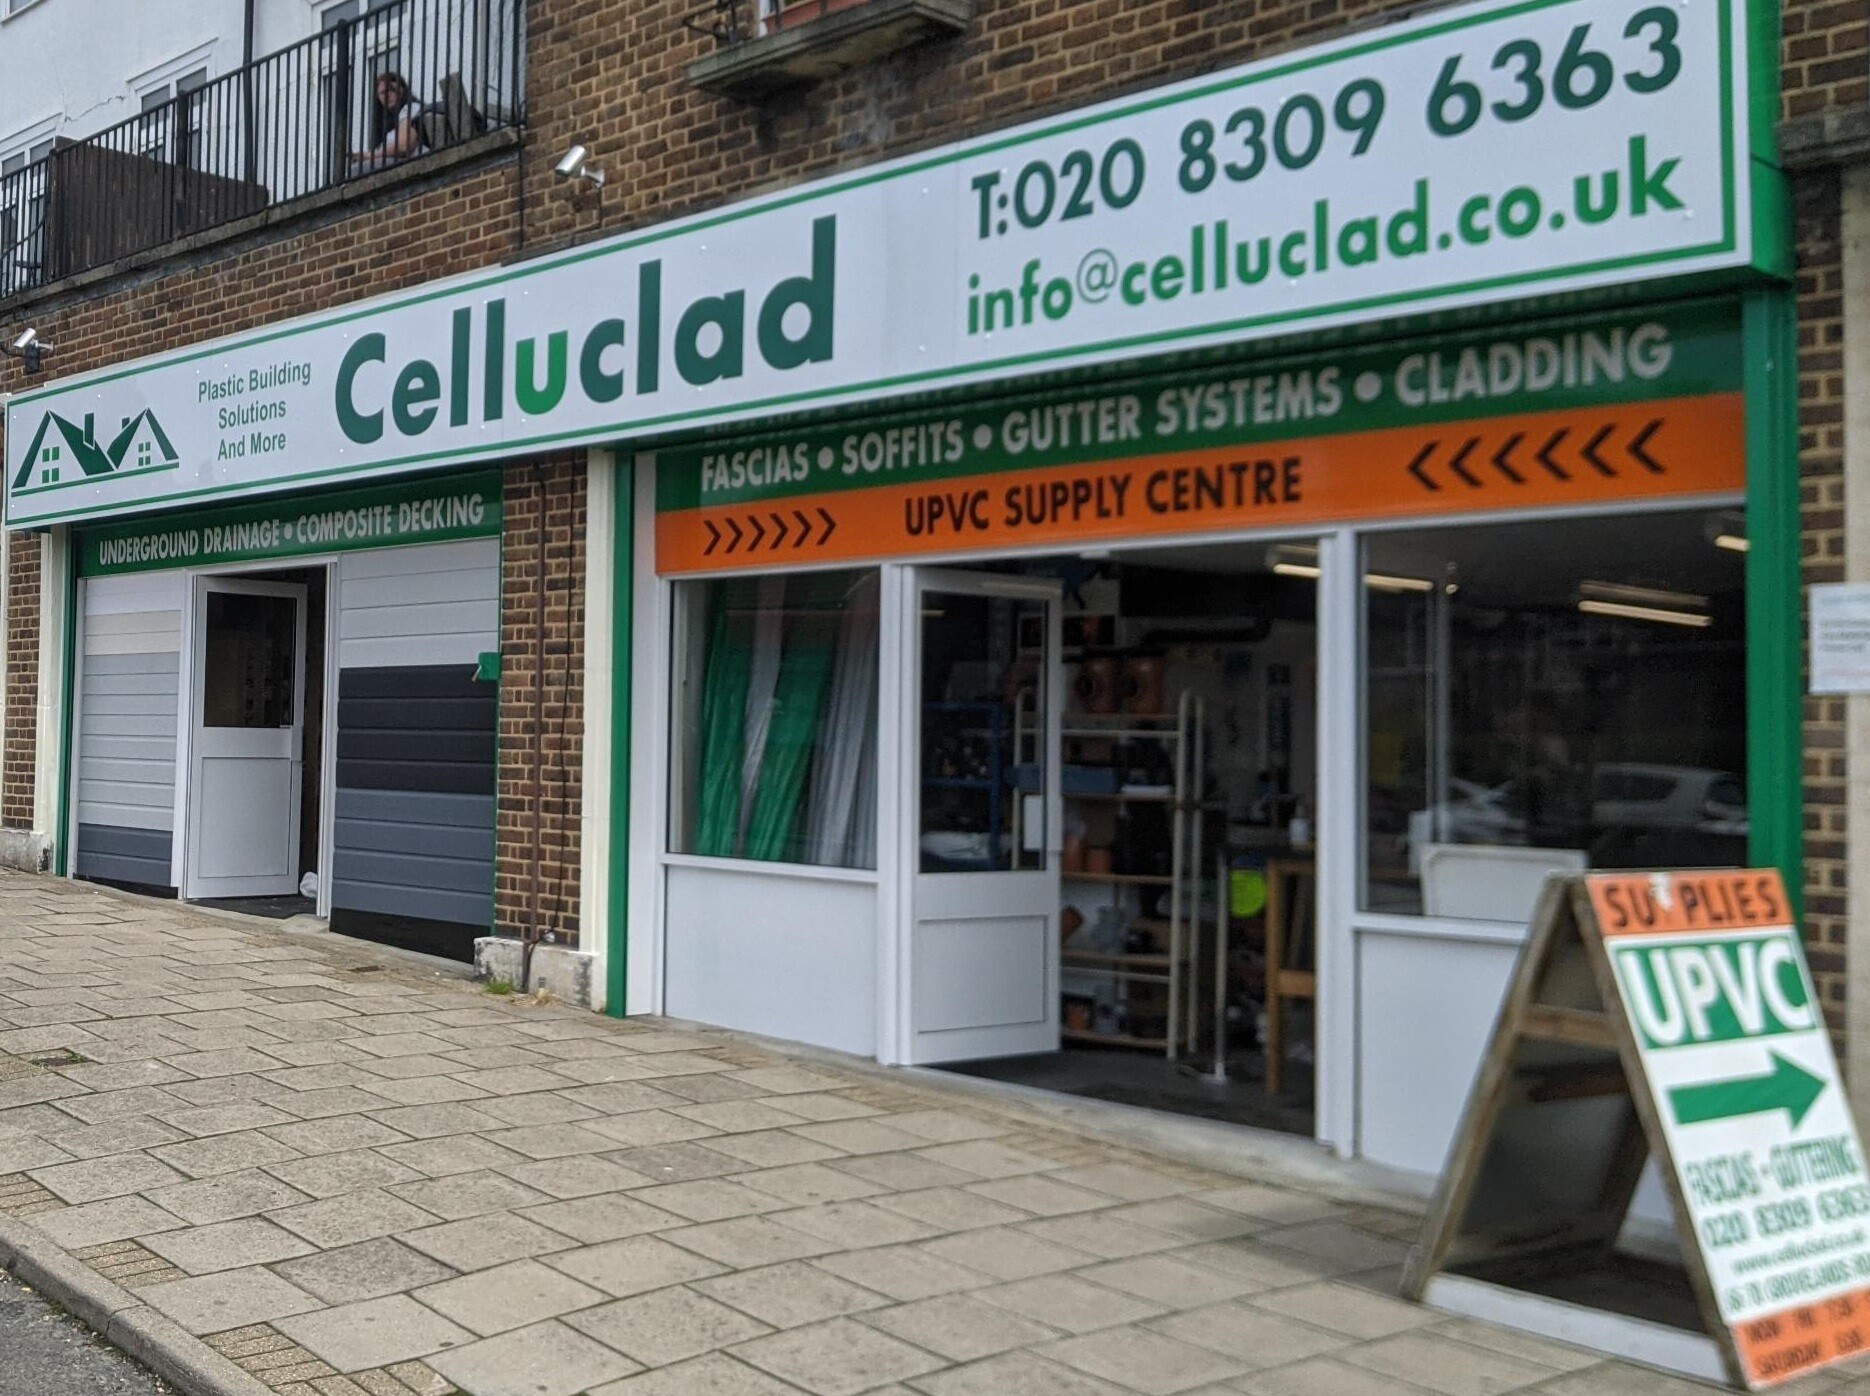 Celluclad Bexleyheath – UPVC and Roofline Suppliers